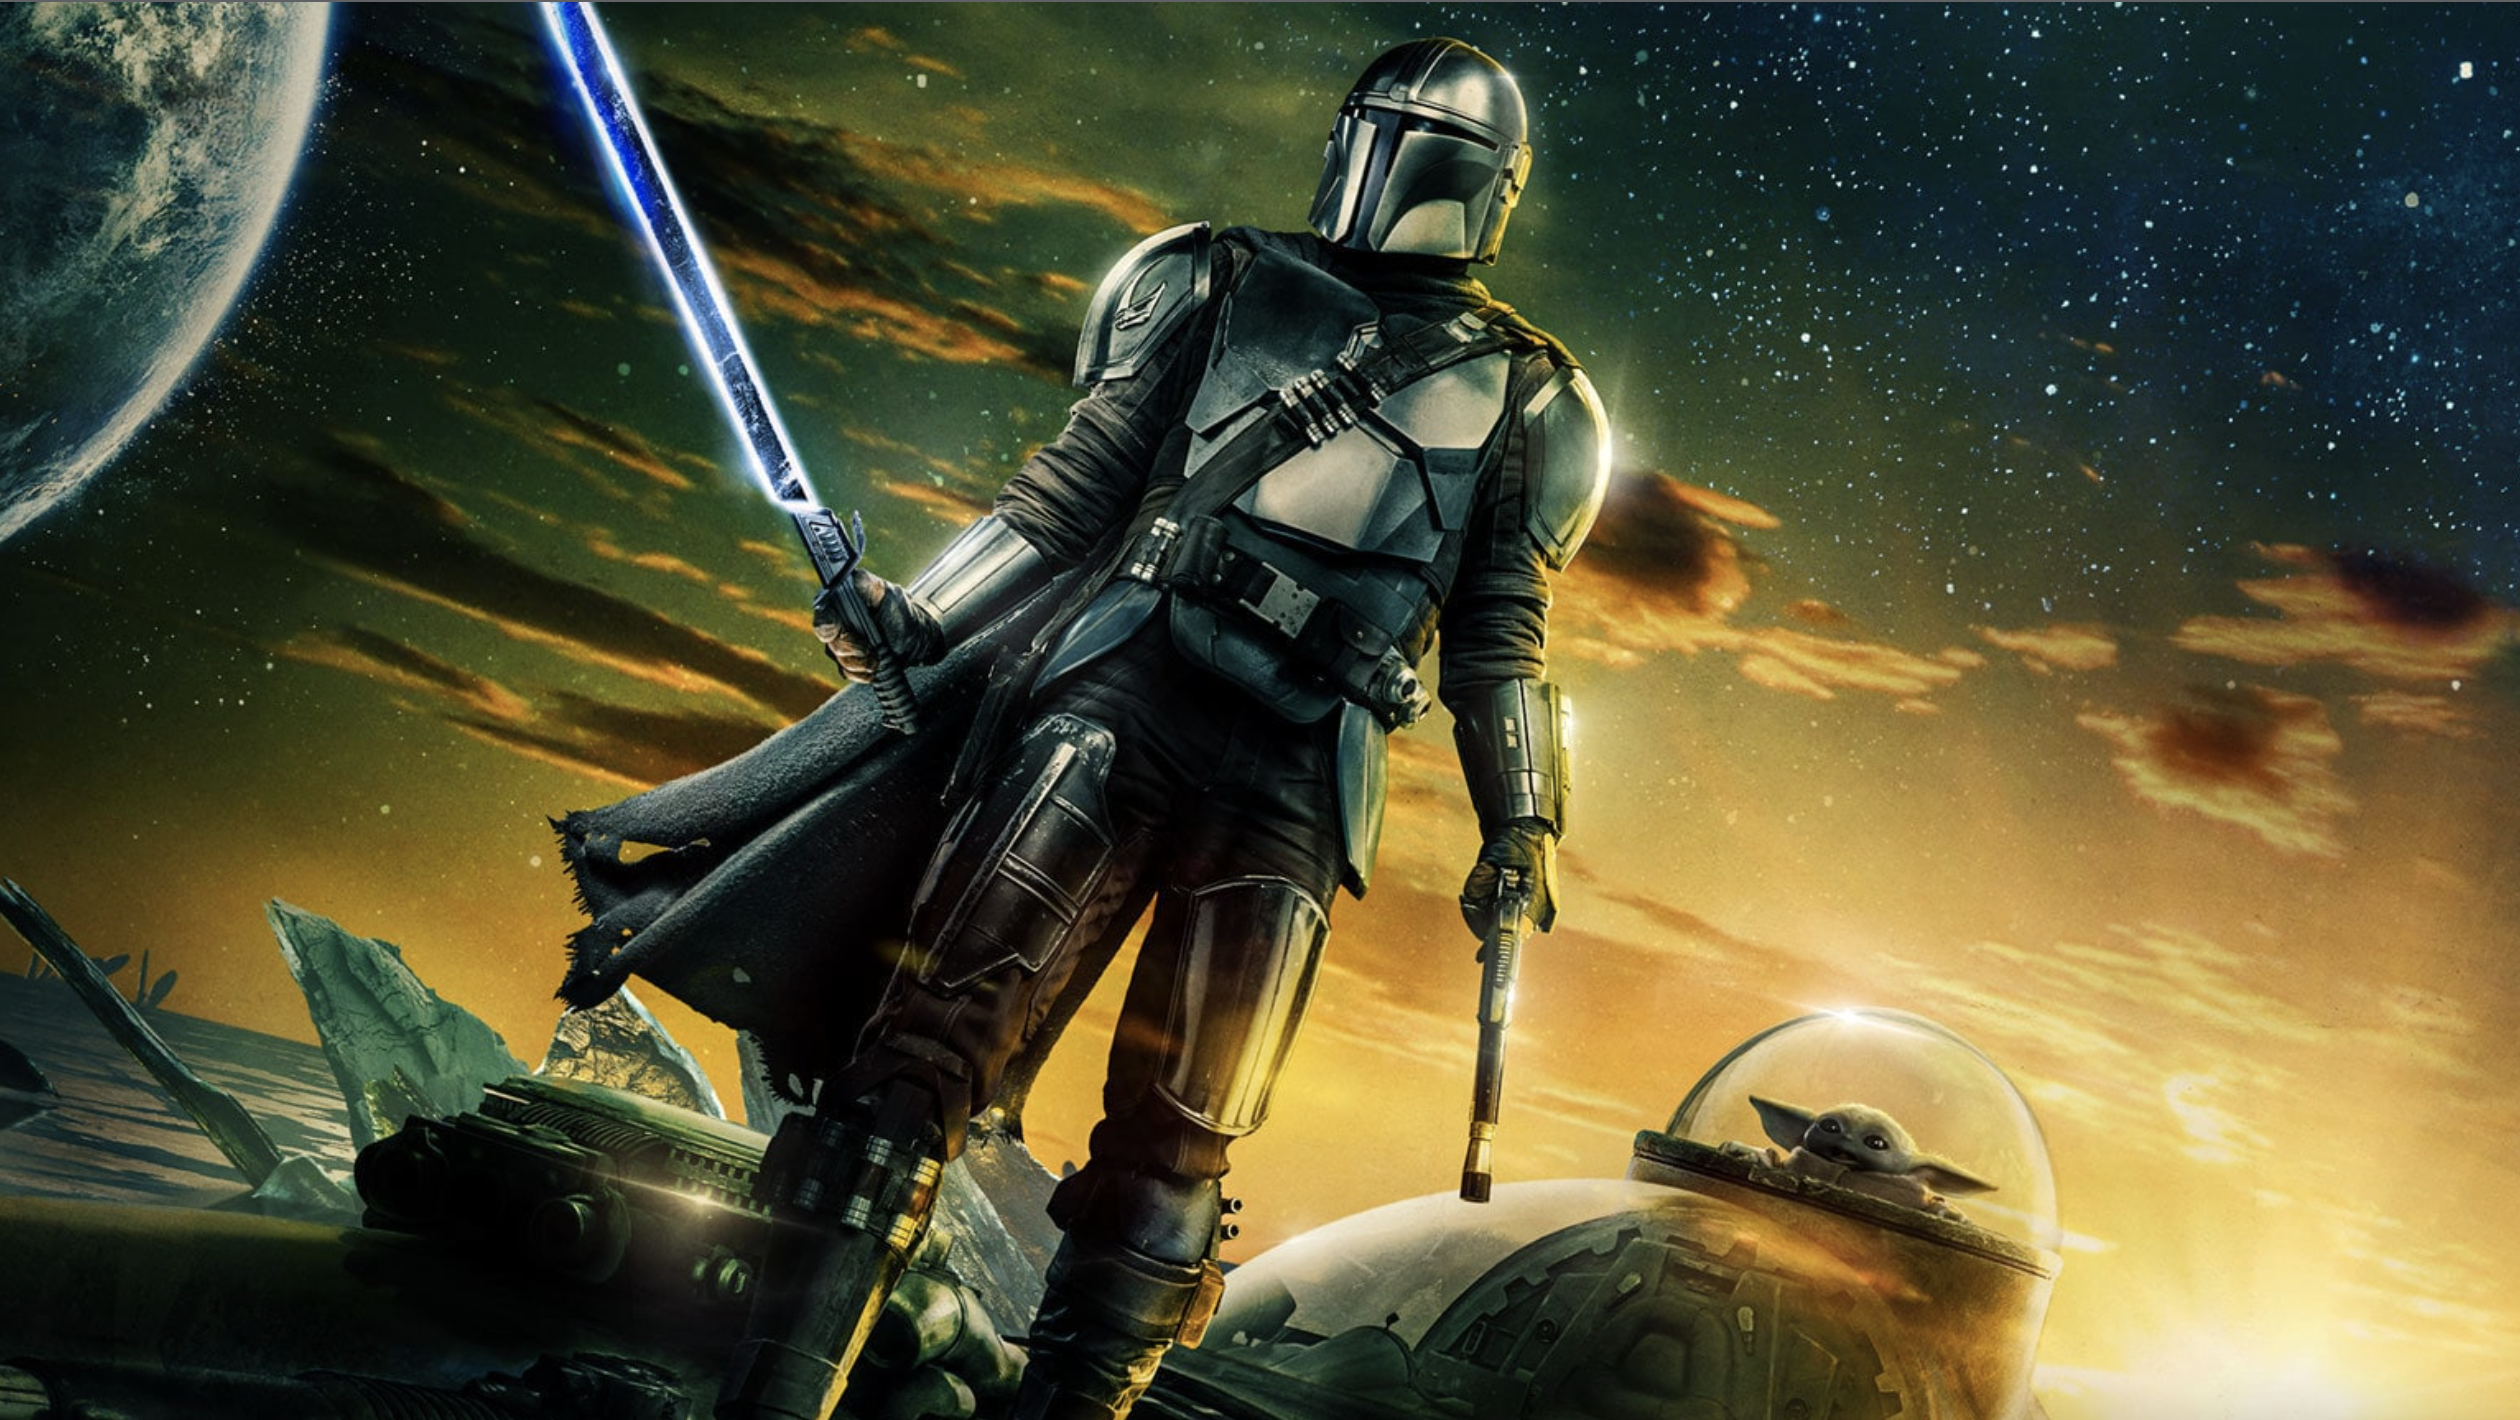 With An Exciting Season Premiere, ‘The Mandalorian’ Continues To Prove Why It’s An Amazing Star Wars Series 